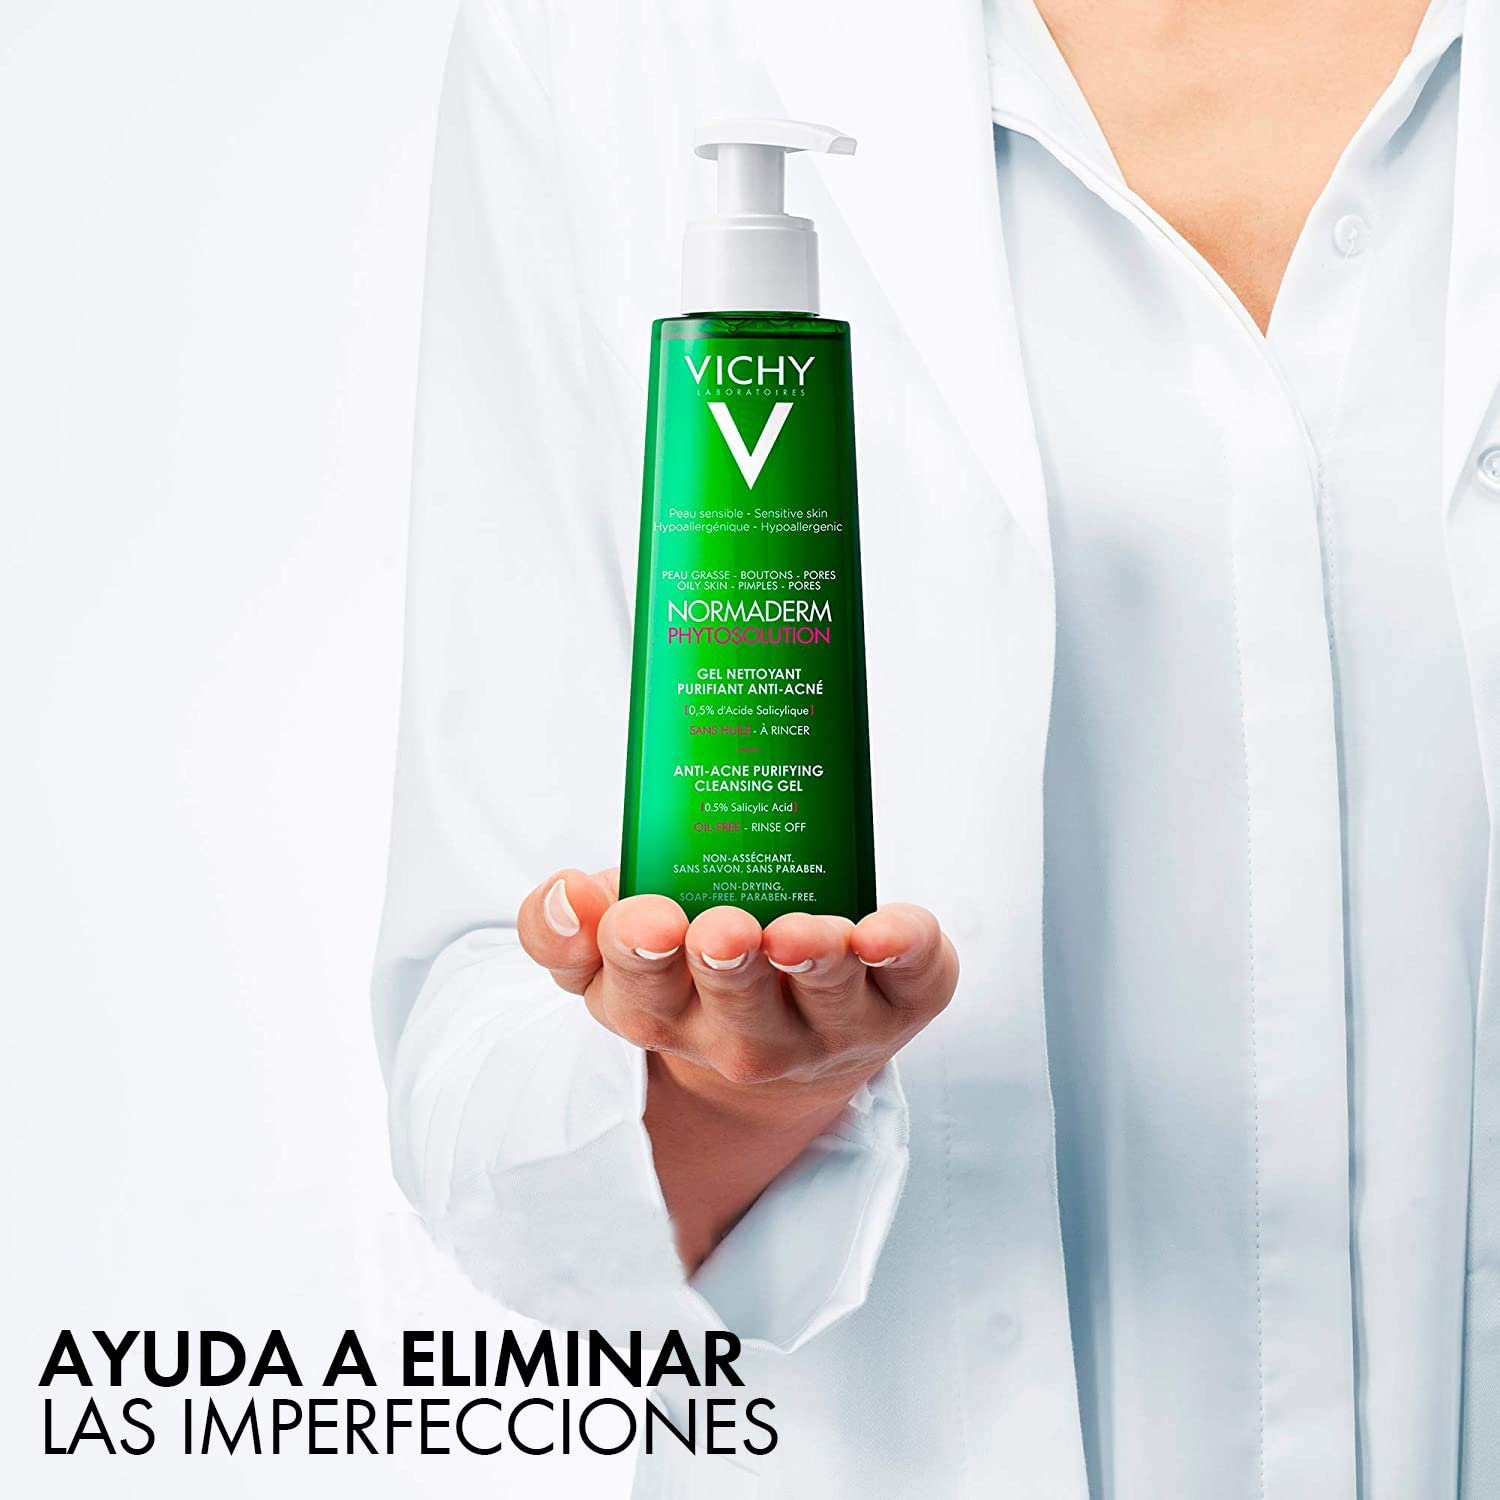 Vichy Normaderm. Vichy Normaderm phytosolution. Vichy Normaderm phytosolution гель пробник. Виши гель fresco limpiador Purete Thermale Gel. Intensive purifying gel vichy